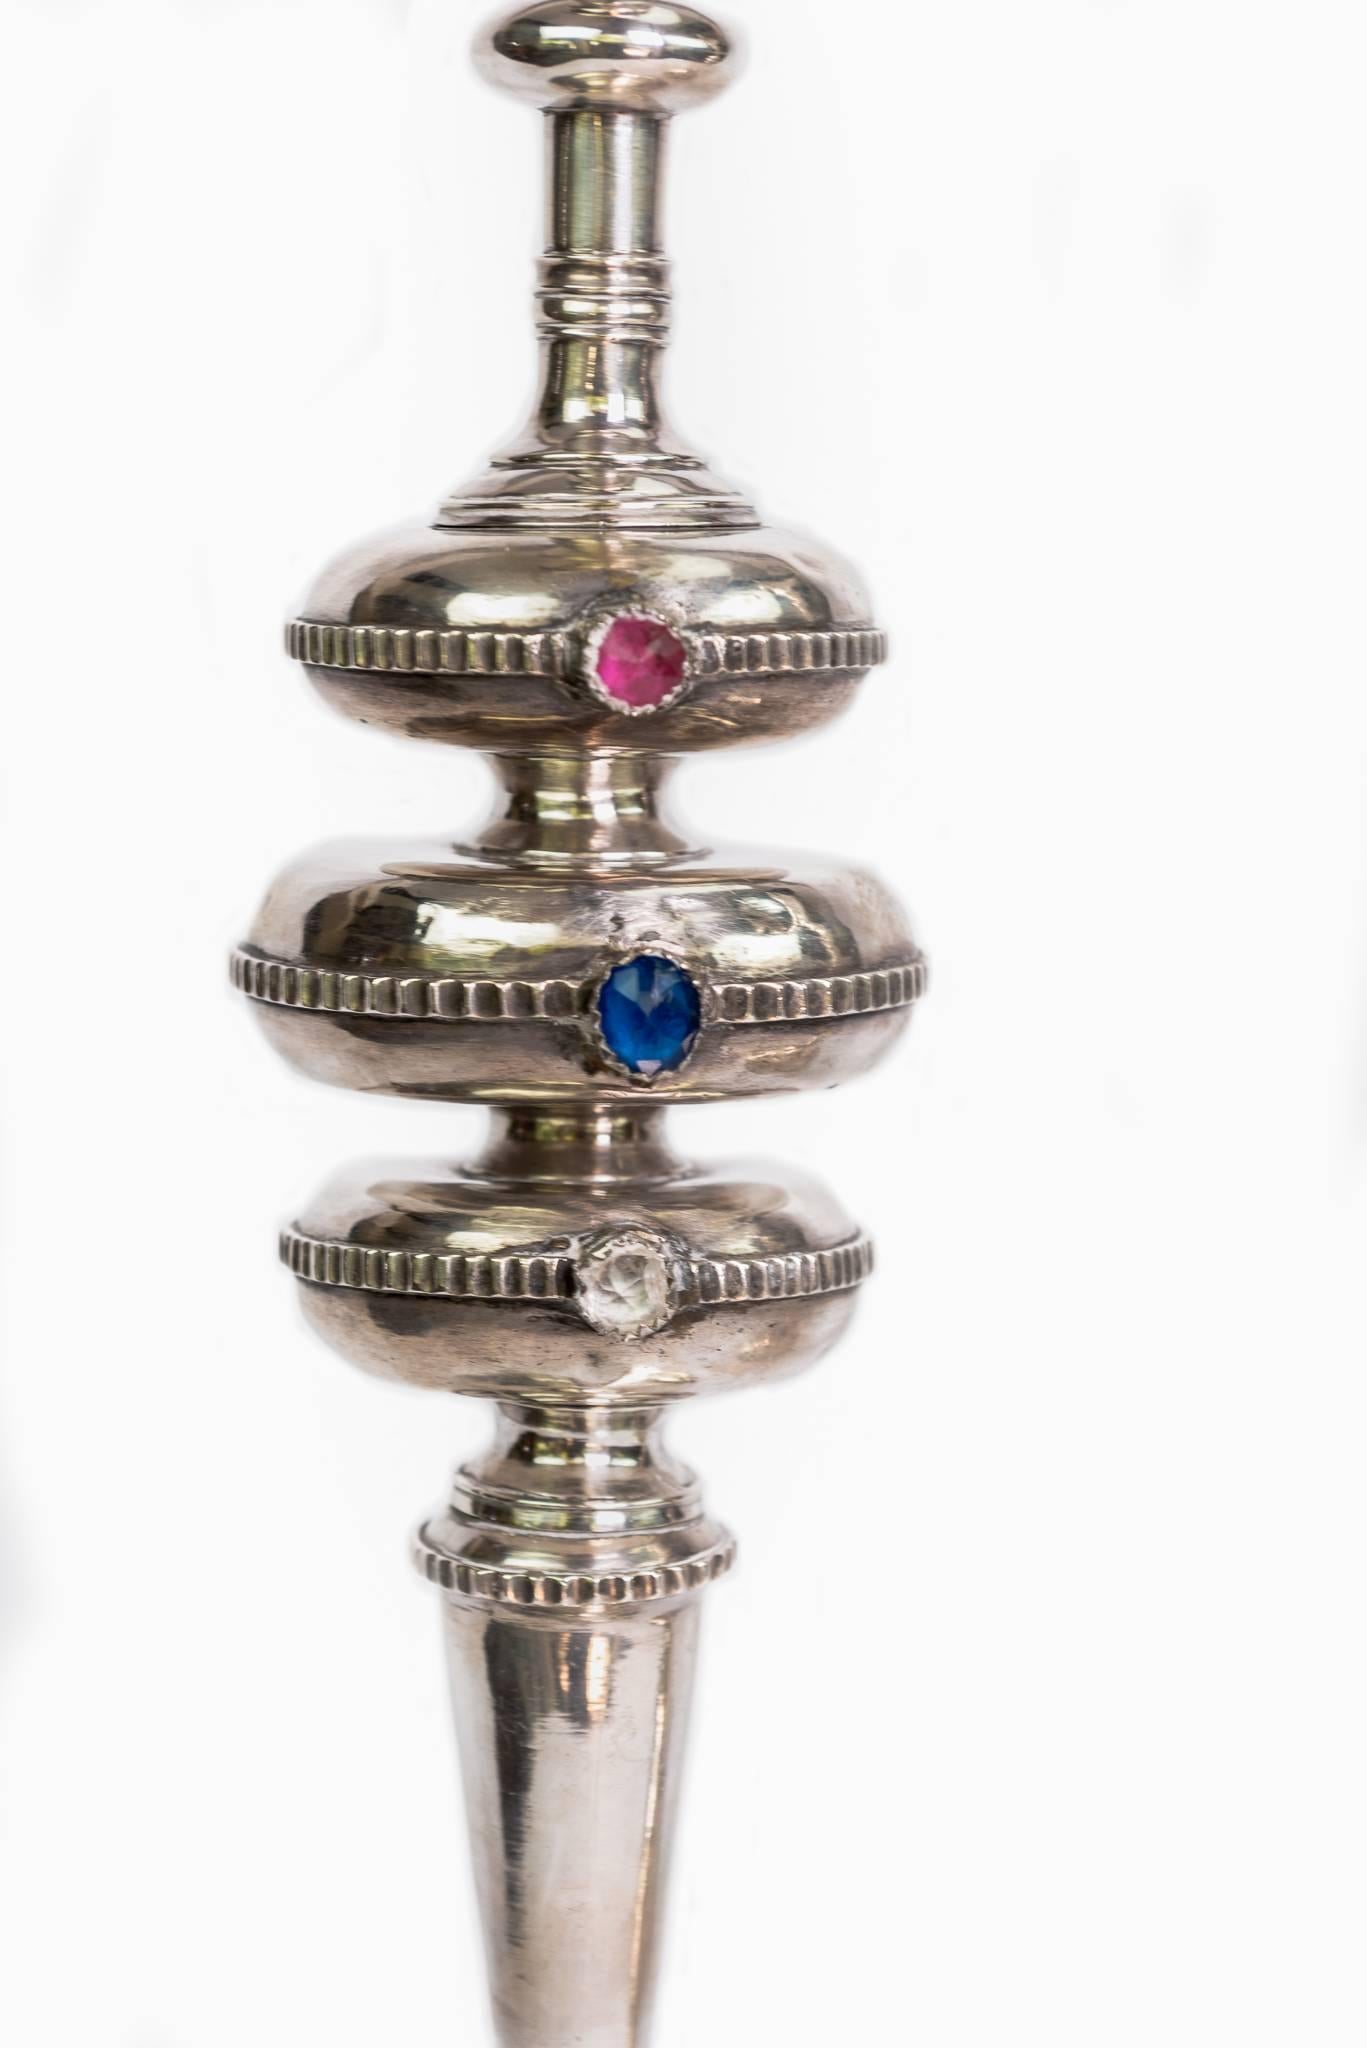 These magnificent sterling silver candlesticks are signed and dated with the owners name. There are visible marks by the maker on the bottom. They are spool design with some repoussé and appliquéd trade beads. They were found in the private chapel